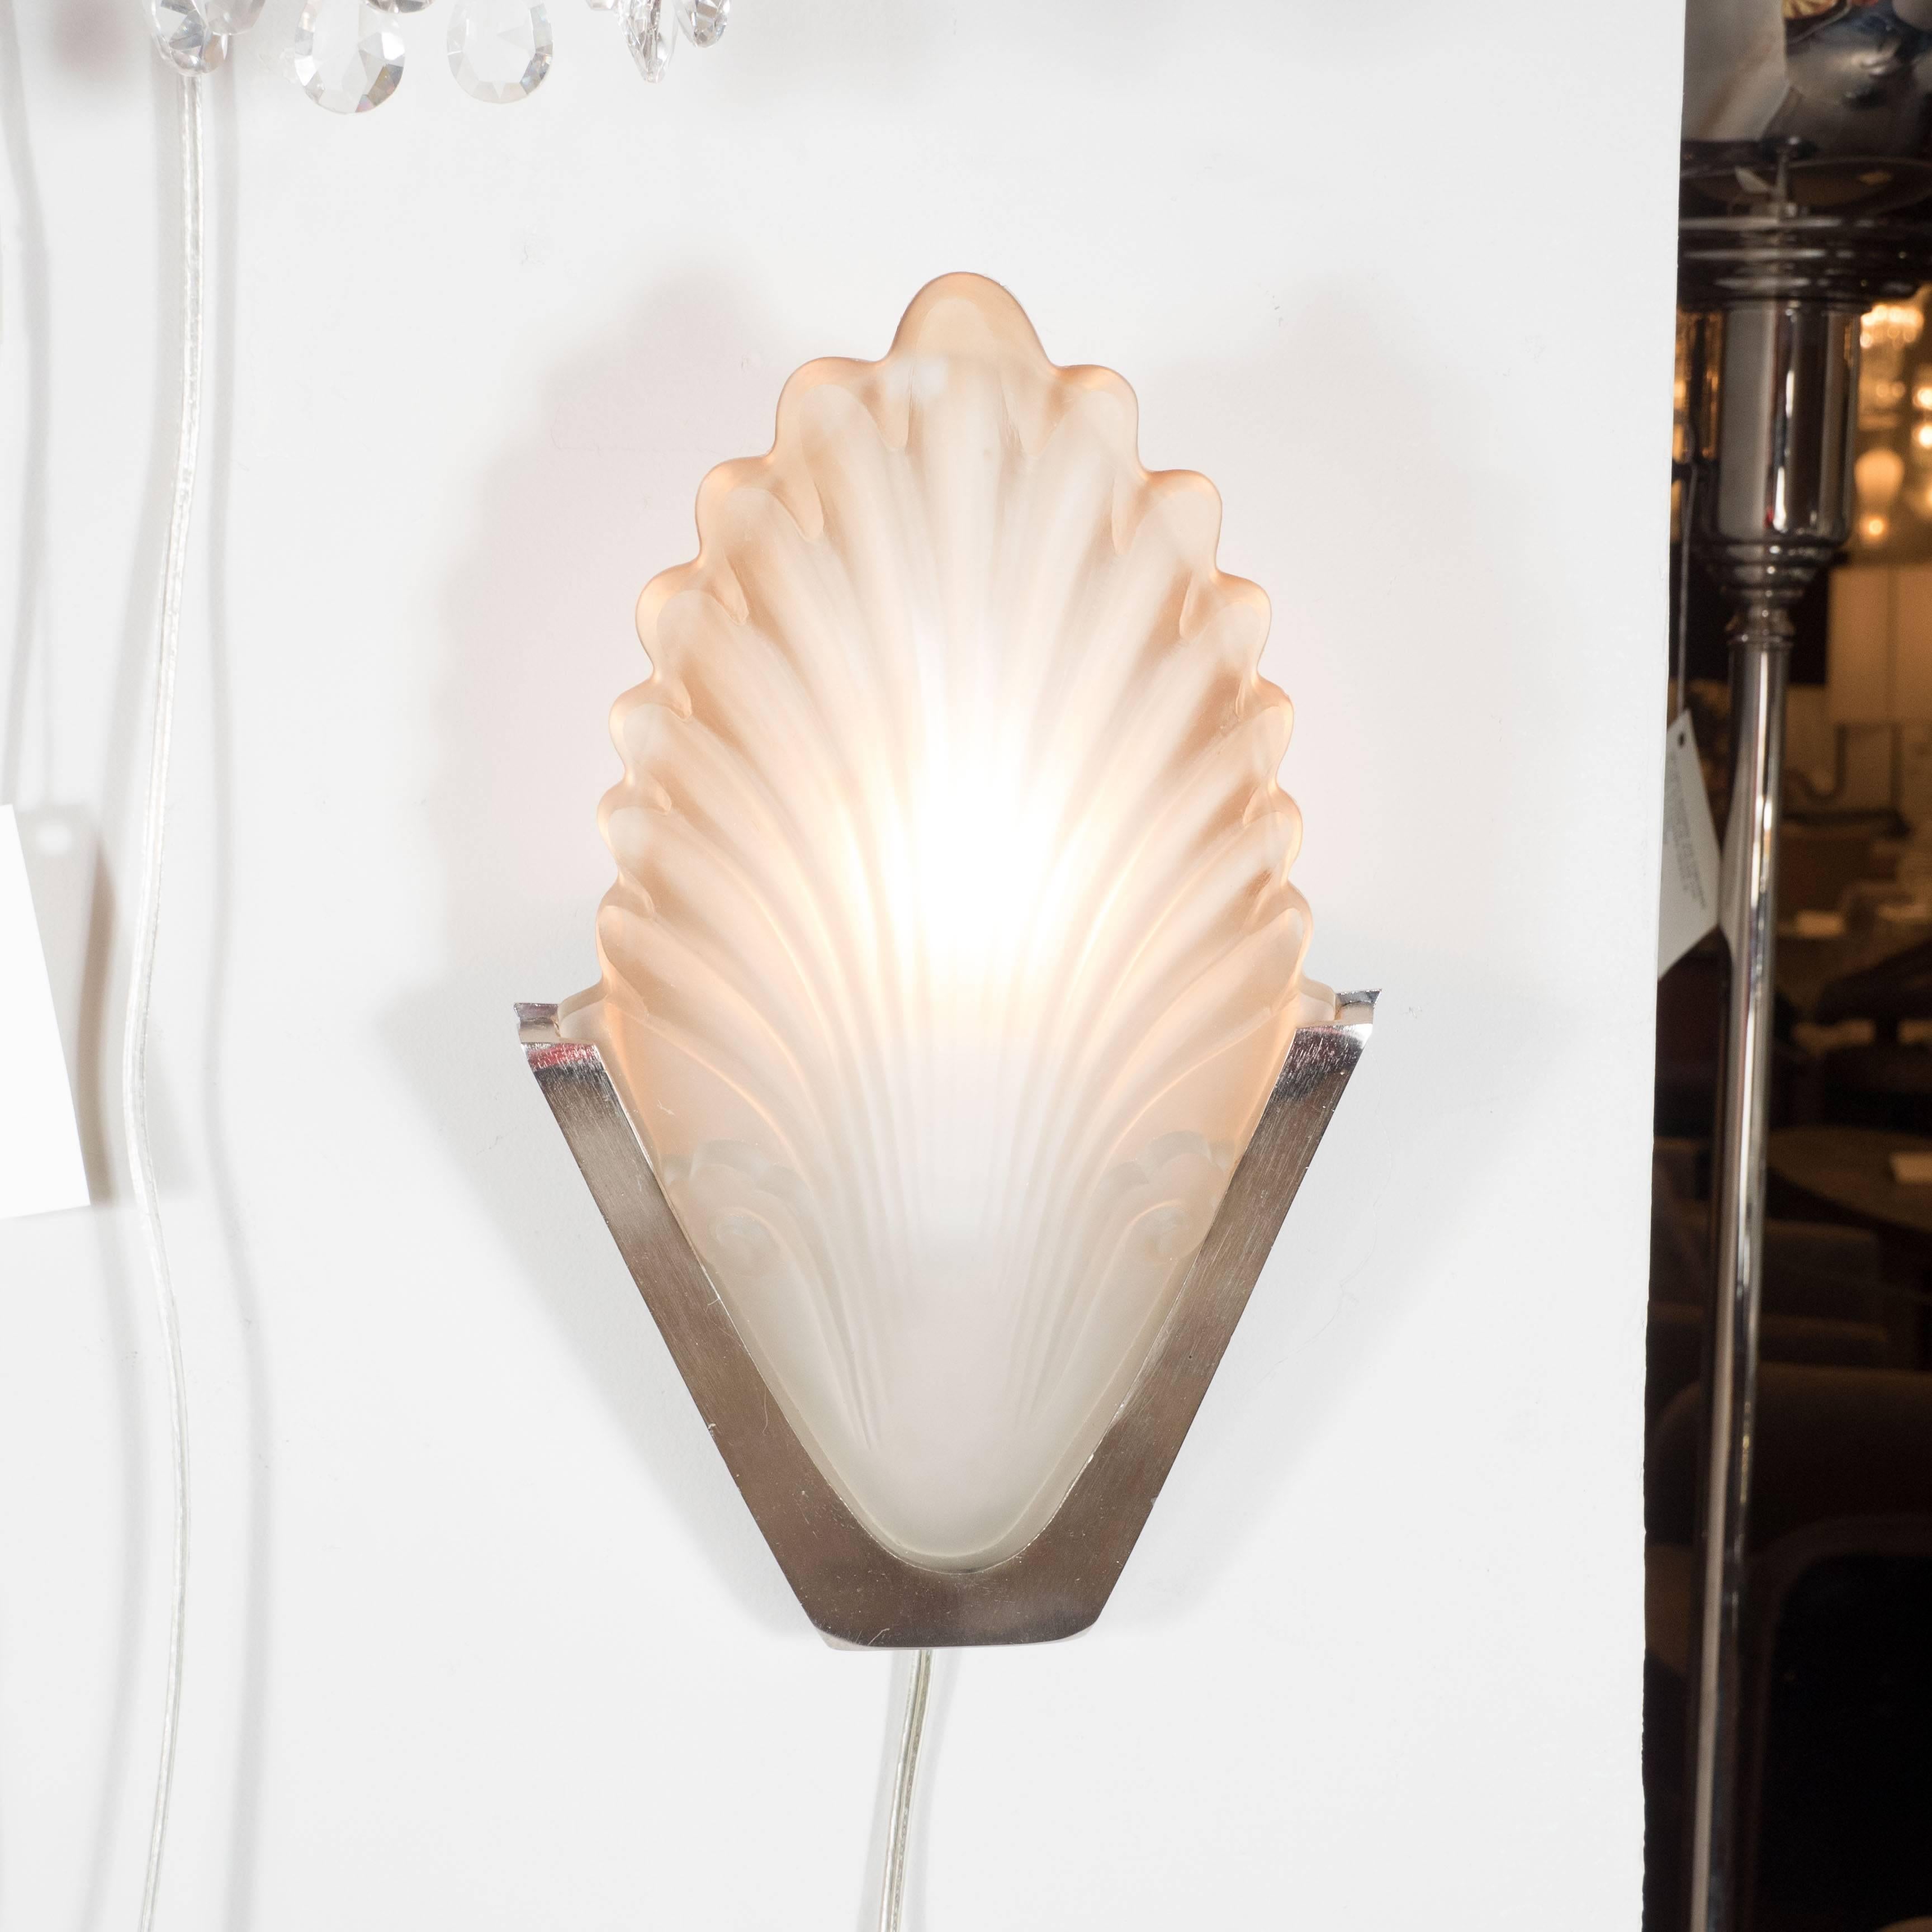 A French Art Deco frosted glass shell sconce with nickeled bronze fittings. A V-shaped backplate supports a single, frosted textured glass shade with ombre smoked amber accents resembling a shell with plume-like detailing. This sconce is fitted with